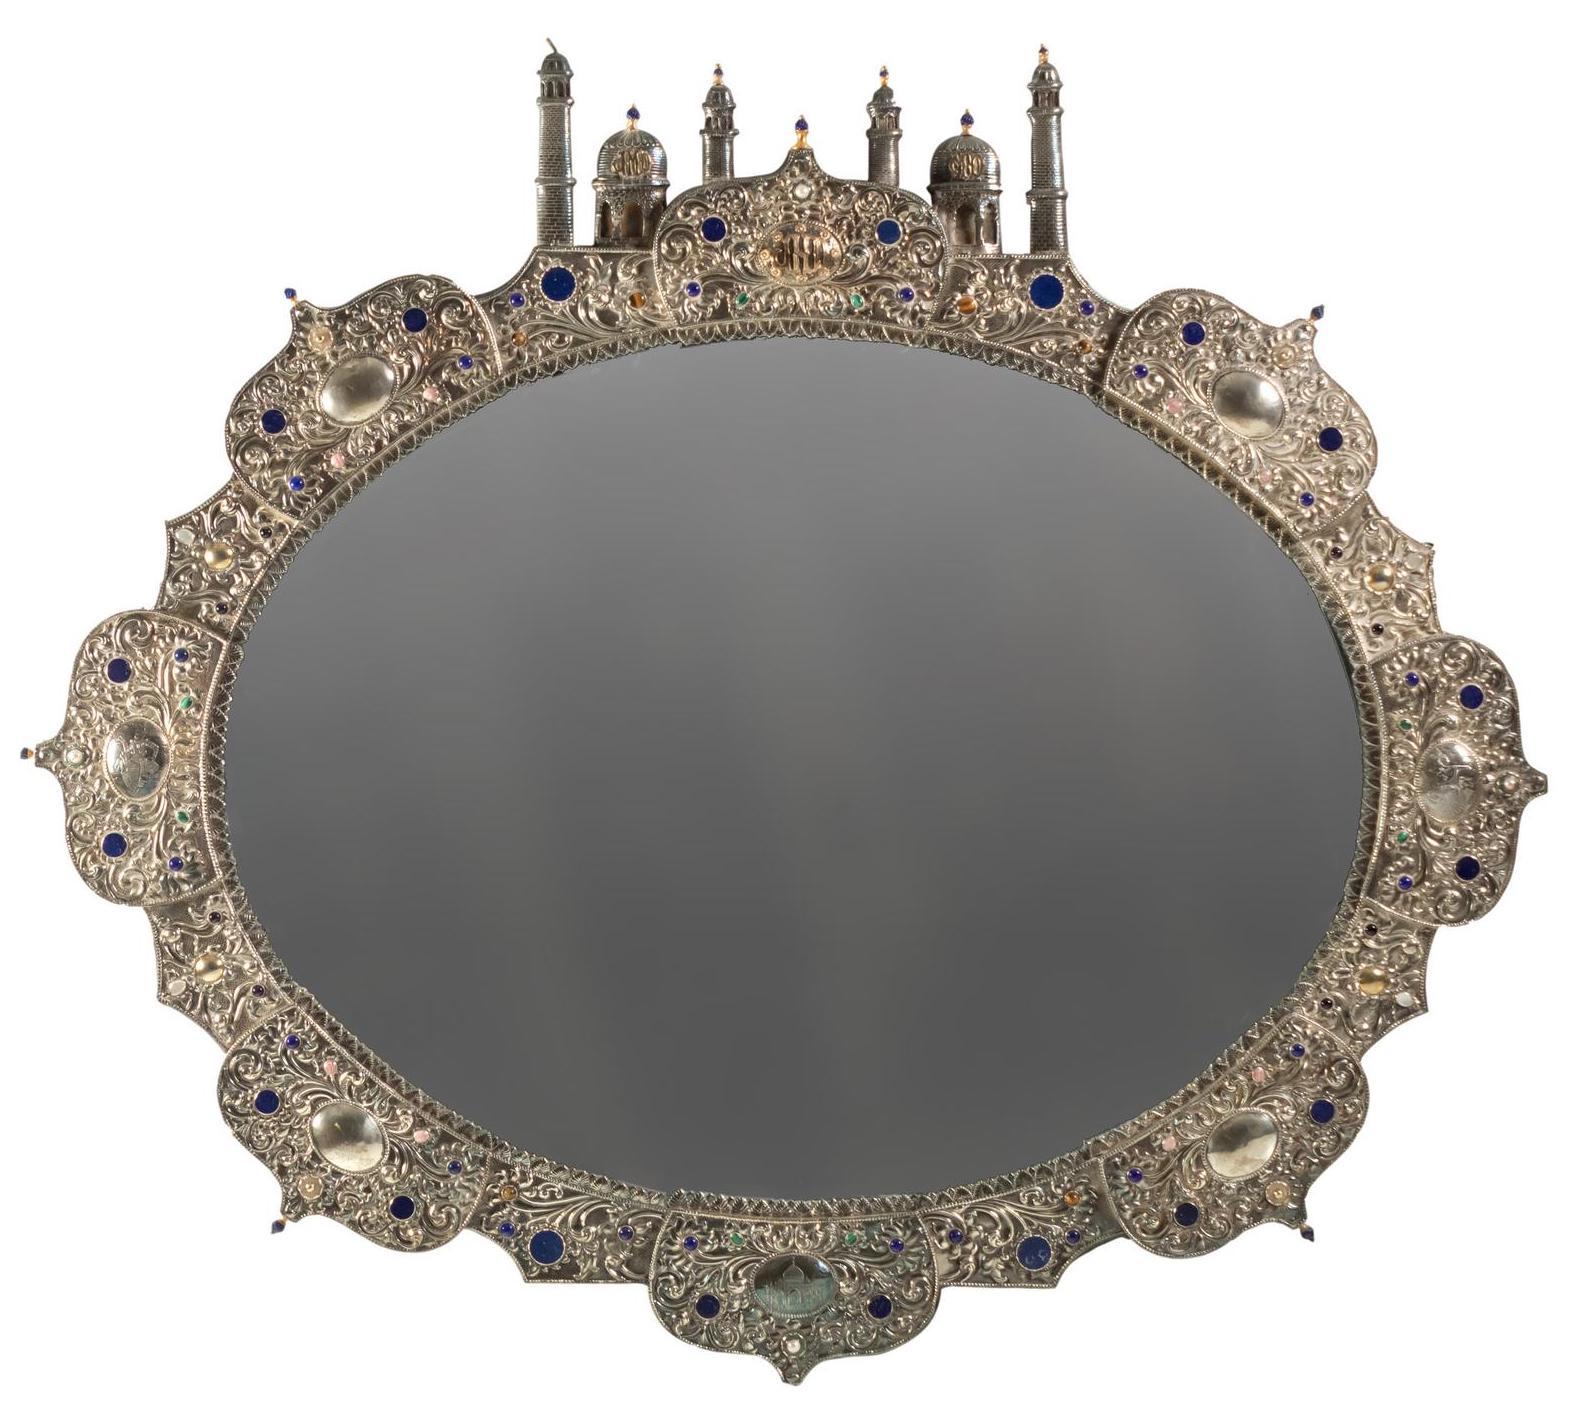 Rare and Magnificent Thai Silver, Gold & Jeweled Palace Mirror for Indian Palace For Sale 10